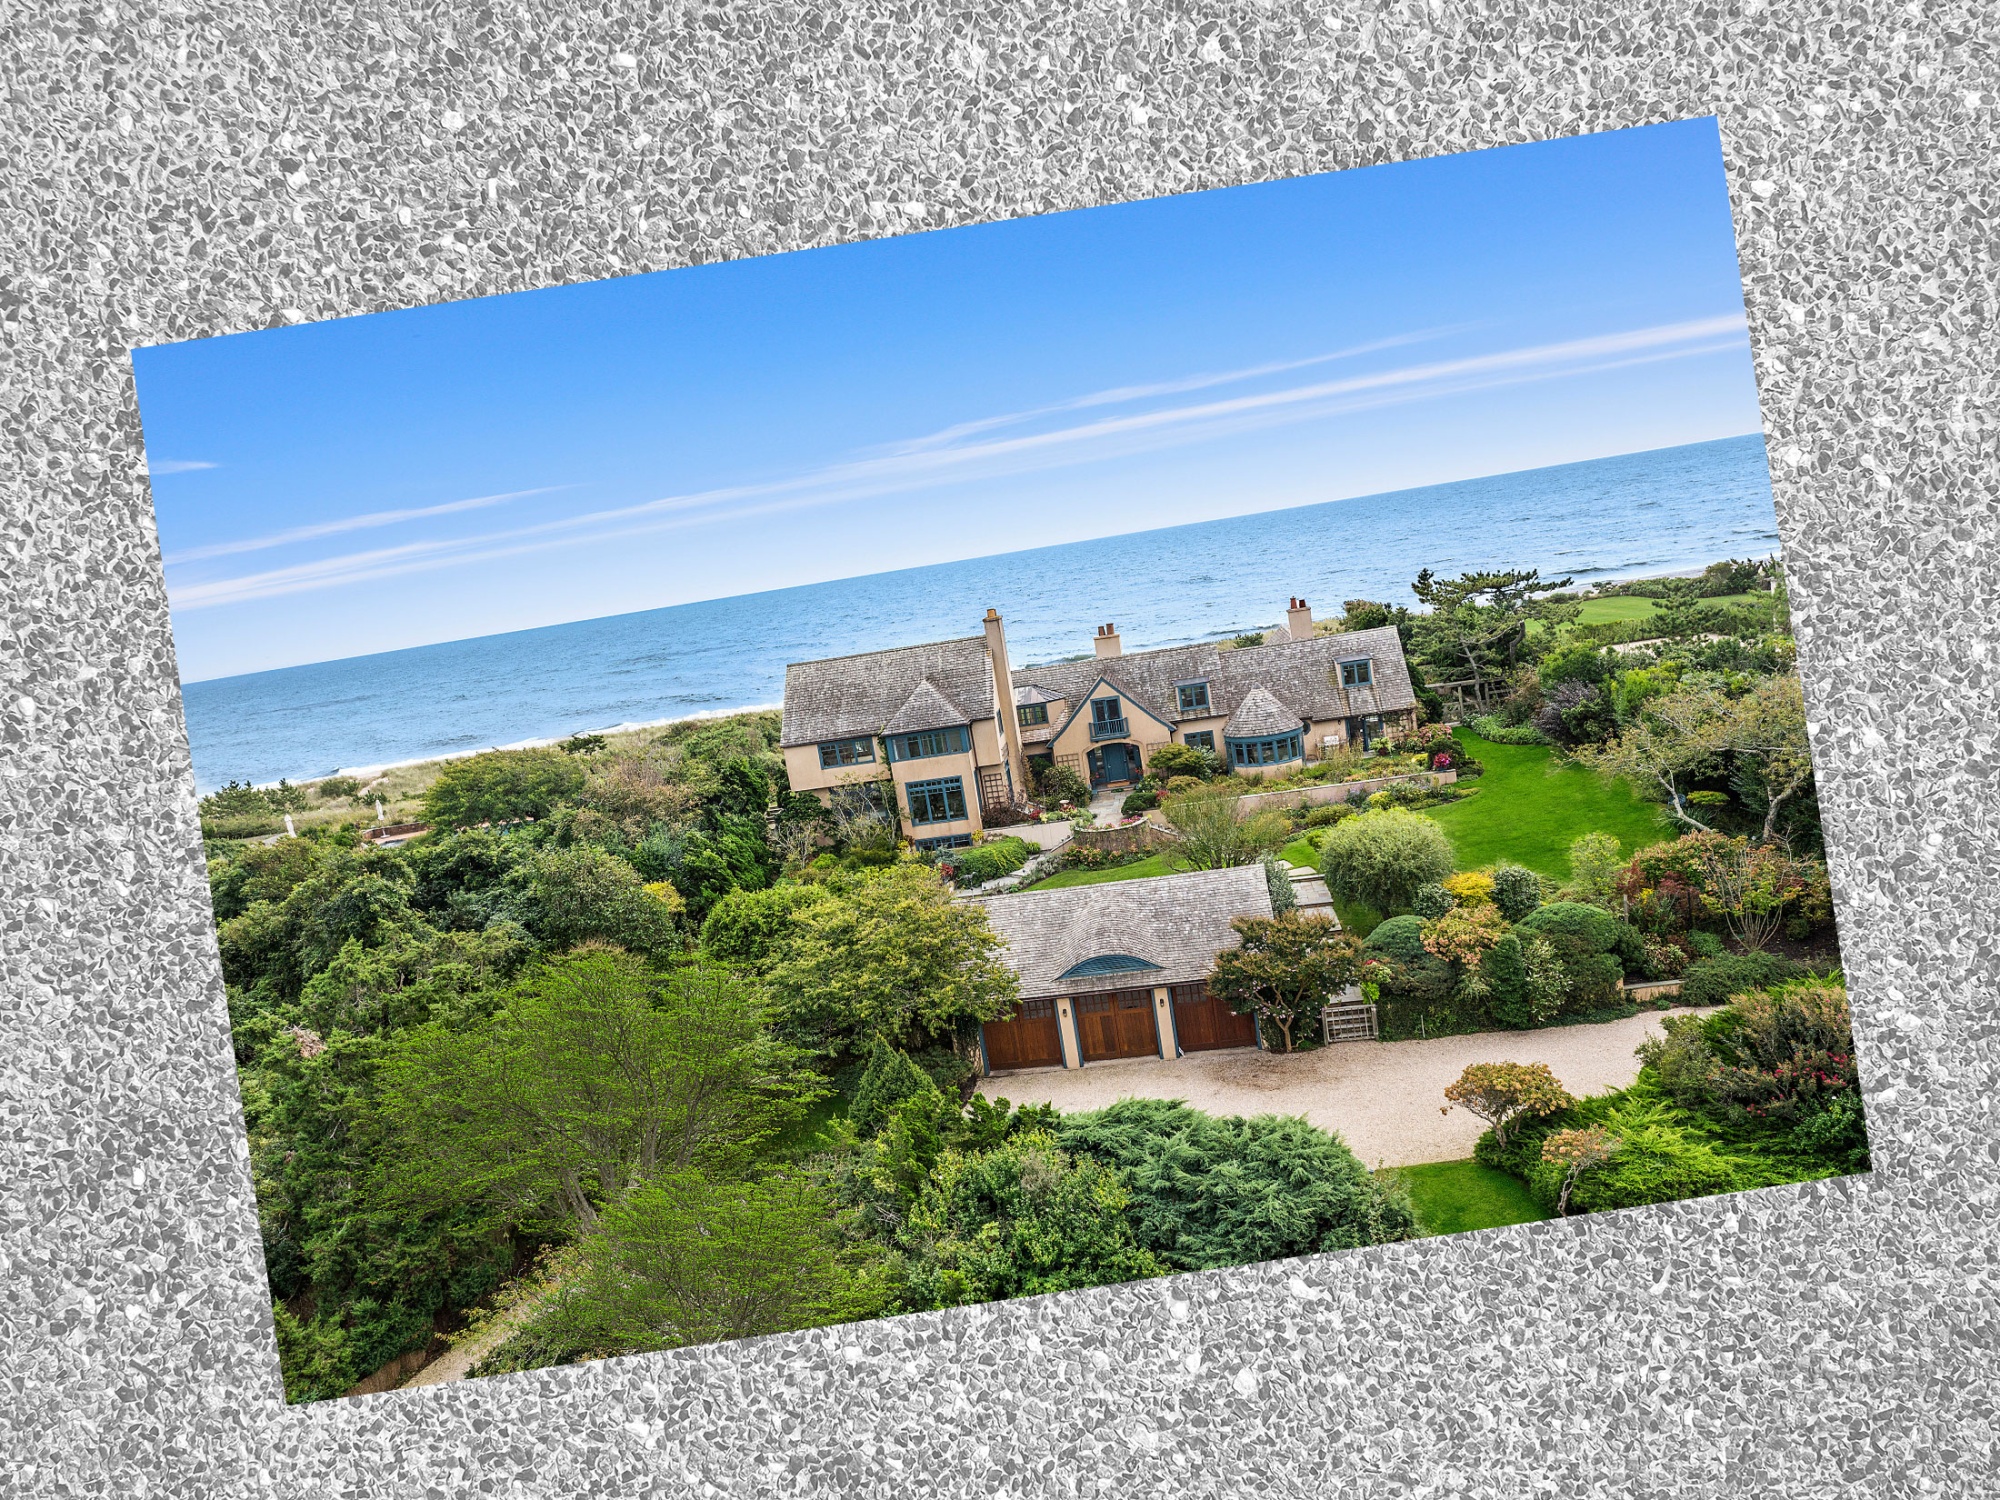 51 West End Road in East Hampton is on the market for $60 million.